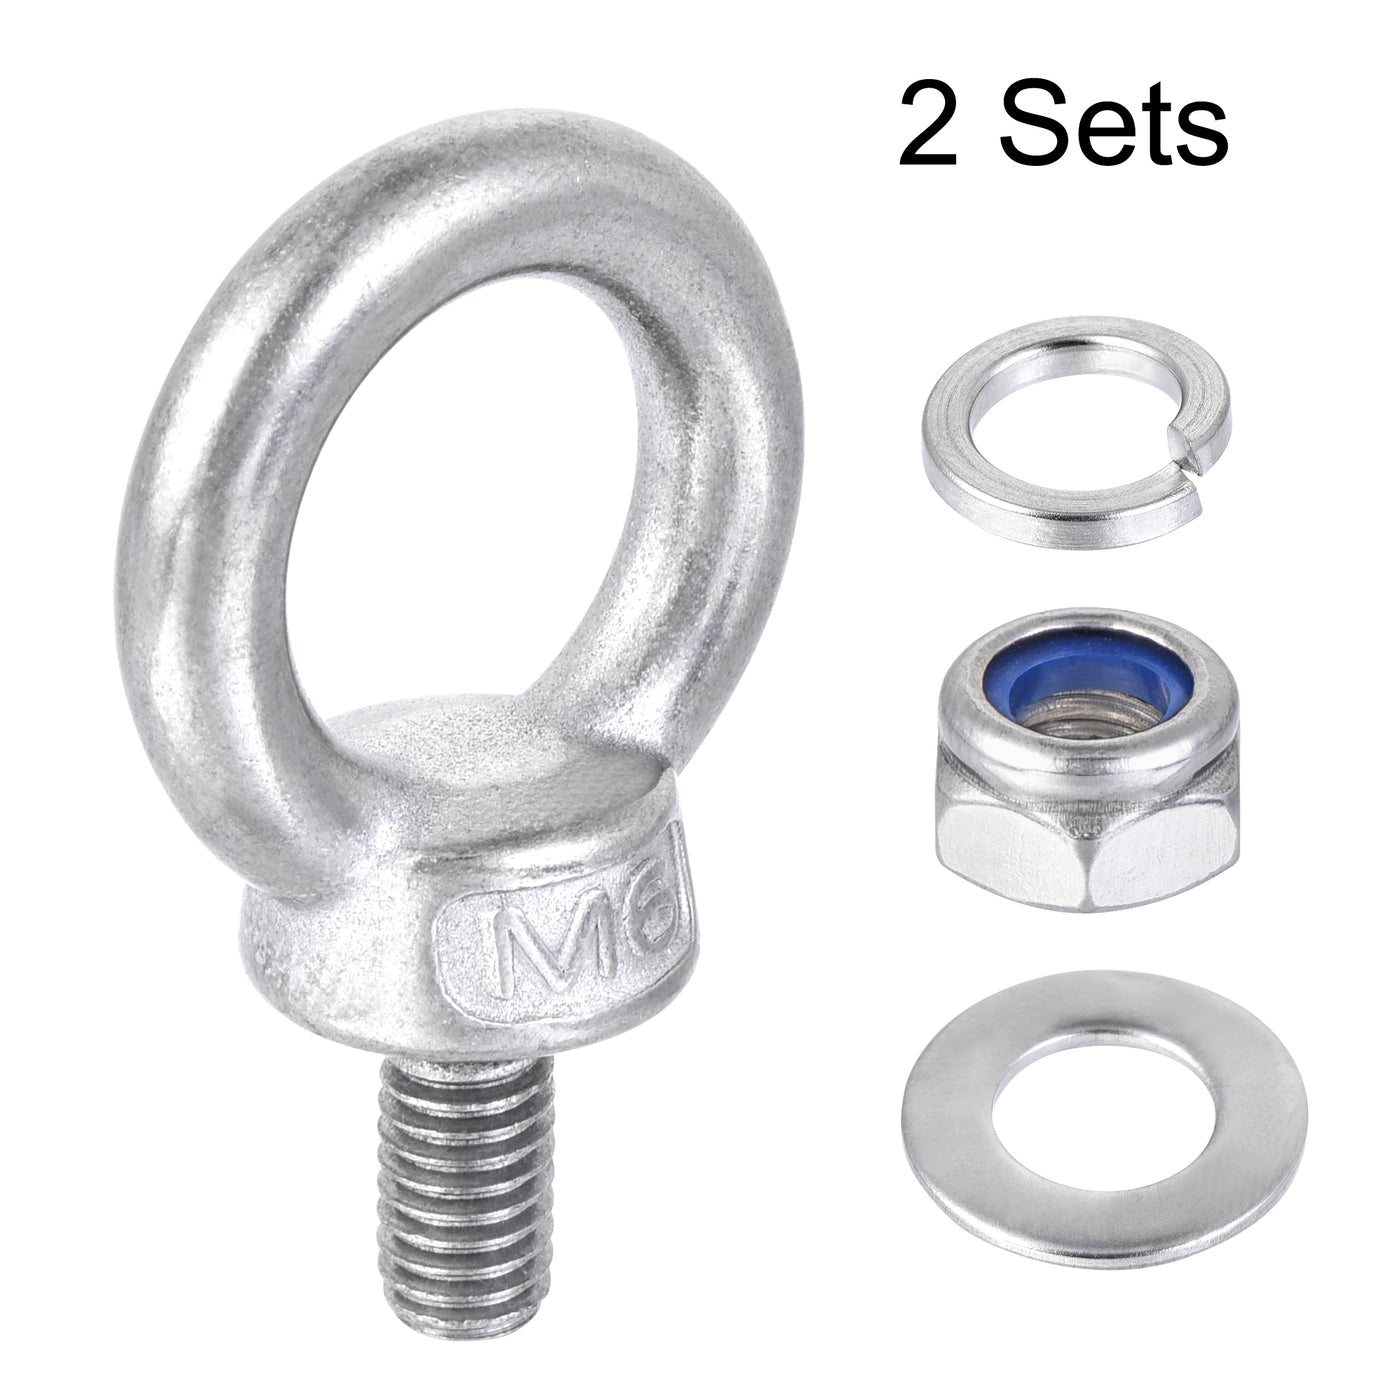 uxcell Uxcell Lifting Eye Bolt M6 x 12mm Male Thread with Hex Screw Nut Gasket Flat Washer for Hanging, 304 Stainless Steel, 2 Sets